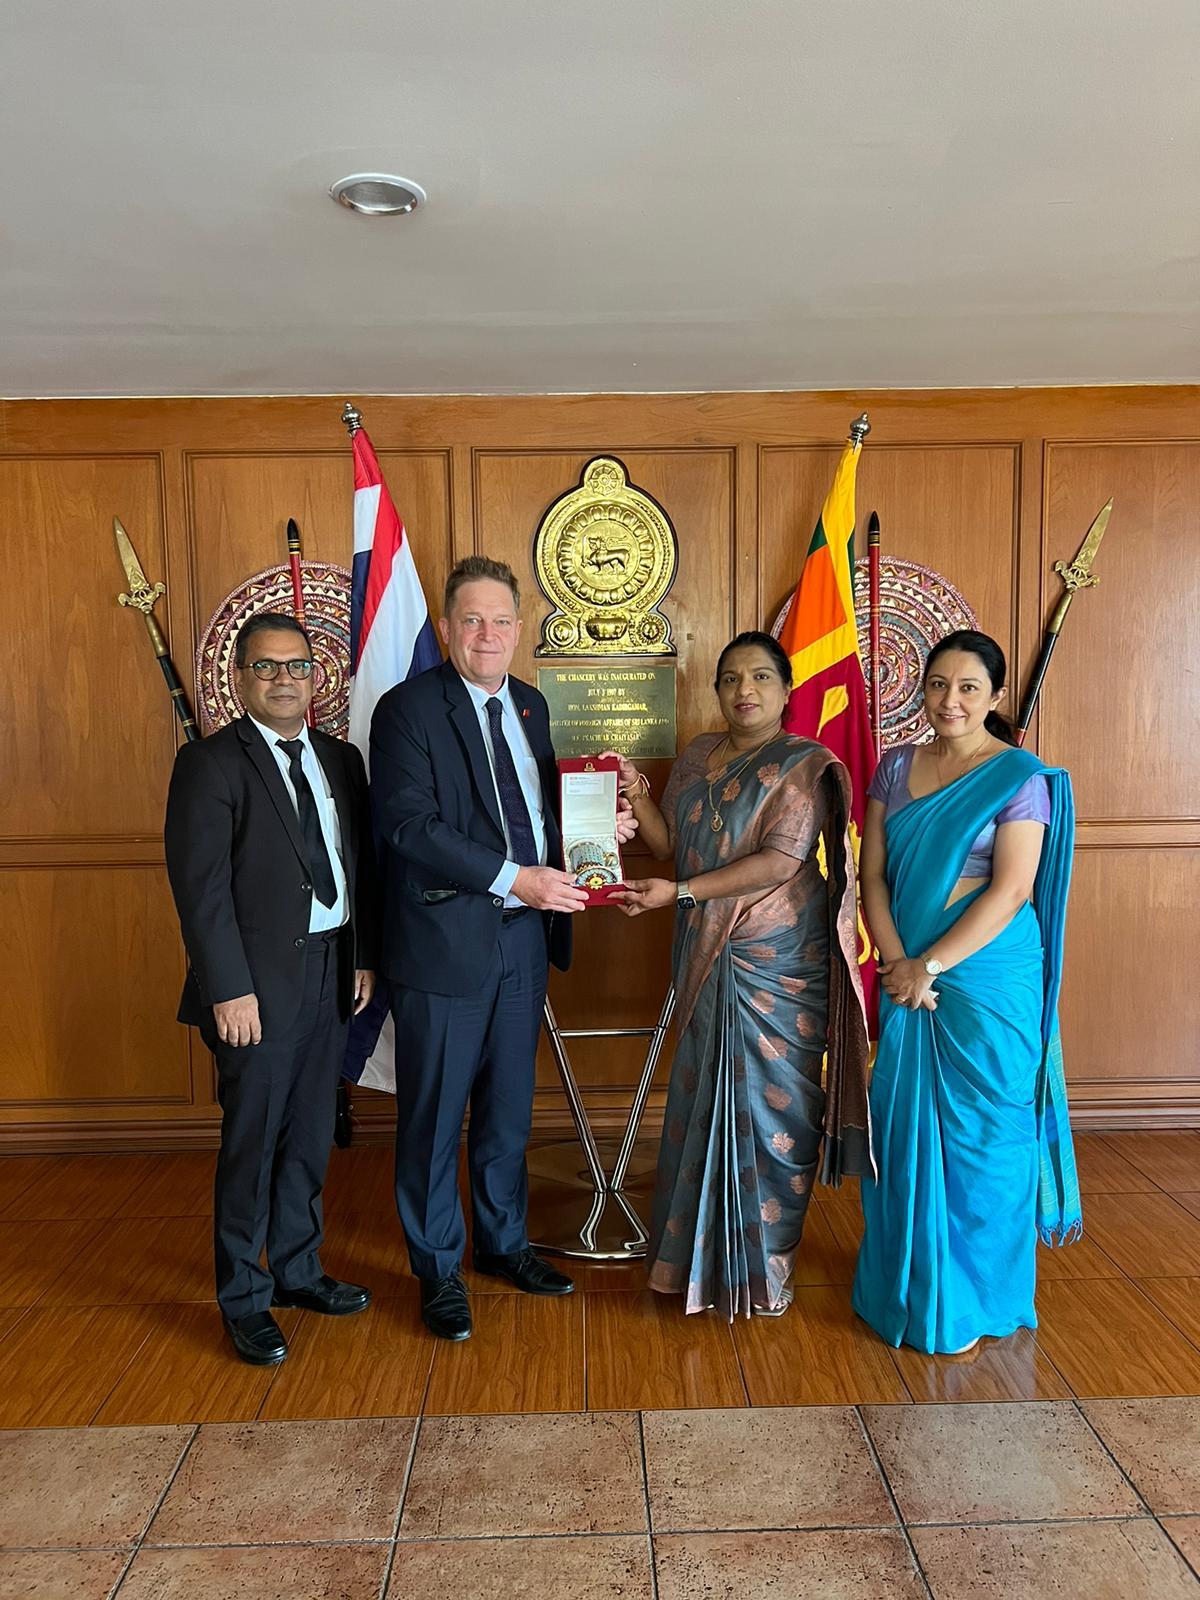 Executive Director of Asian Disaster Preparedness Centre (ADPC) Hans Guttman paid a courtesy called on Ambassador of Sri Lanka to Thailand and Permanent Representative to UNESACP, and Board Member of ADPC , C.A. Caminda I Colonne at the Sri Lanka Mission in Bangkok